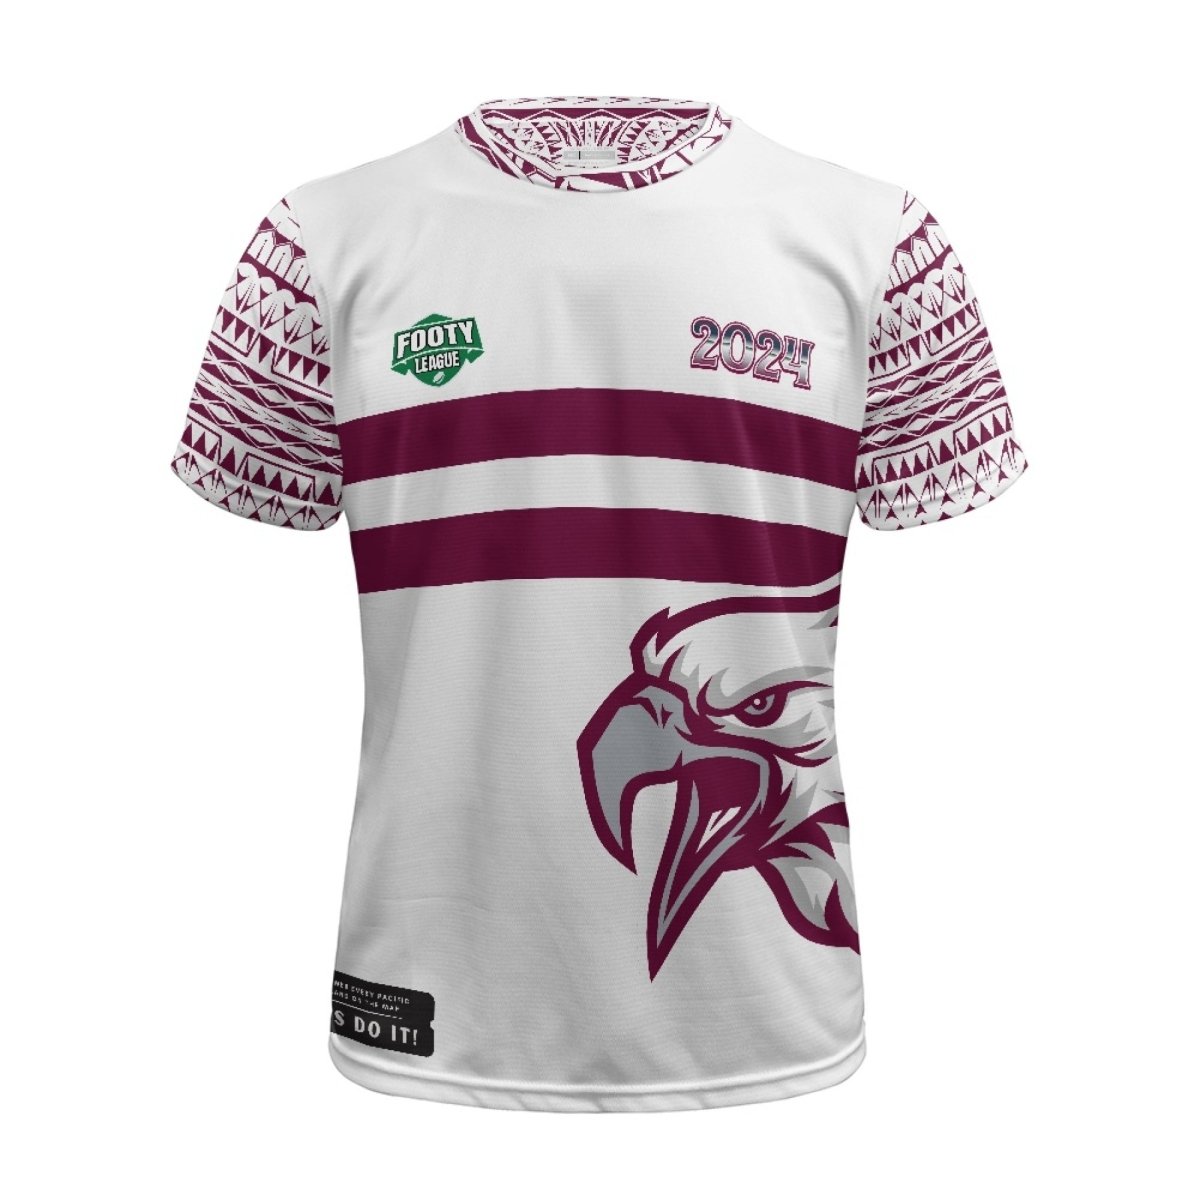 Manly Sea Eagles Pacific Island Rugby League Tee - Cook Islands - Nesian Kulture